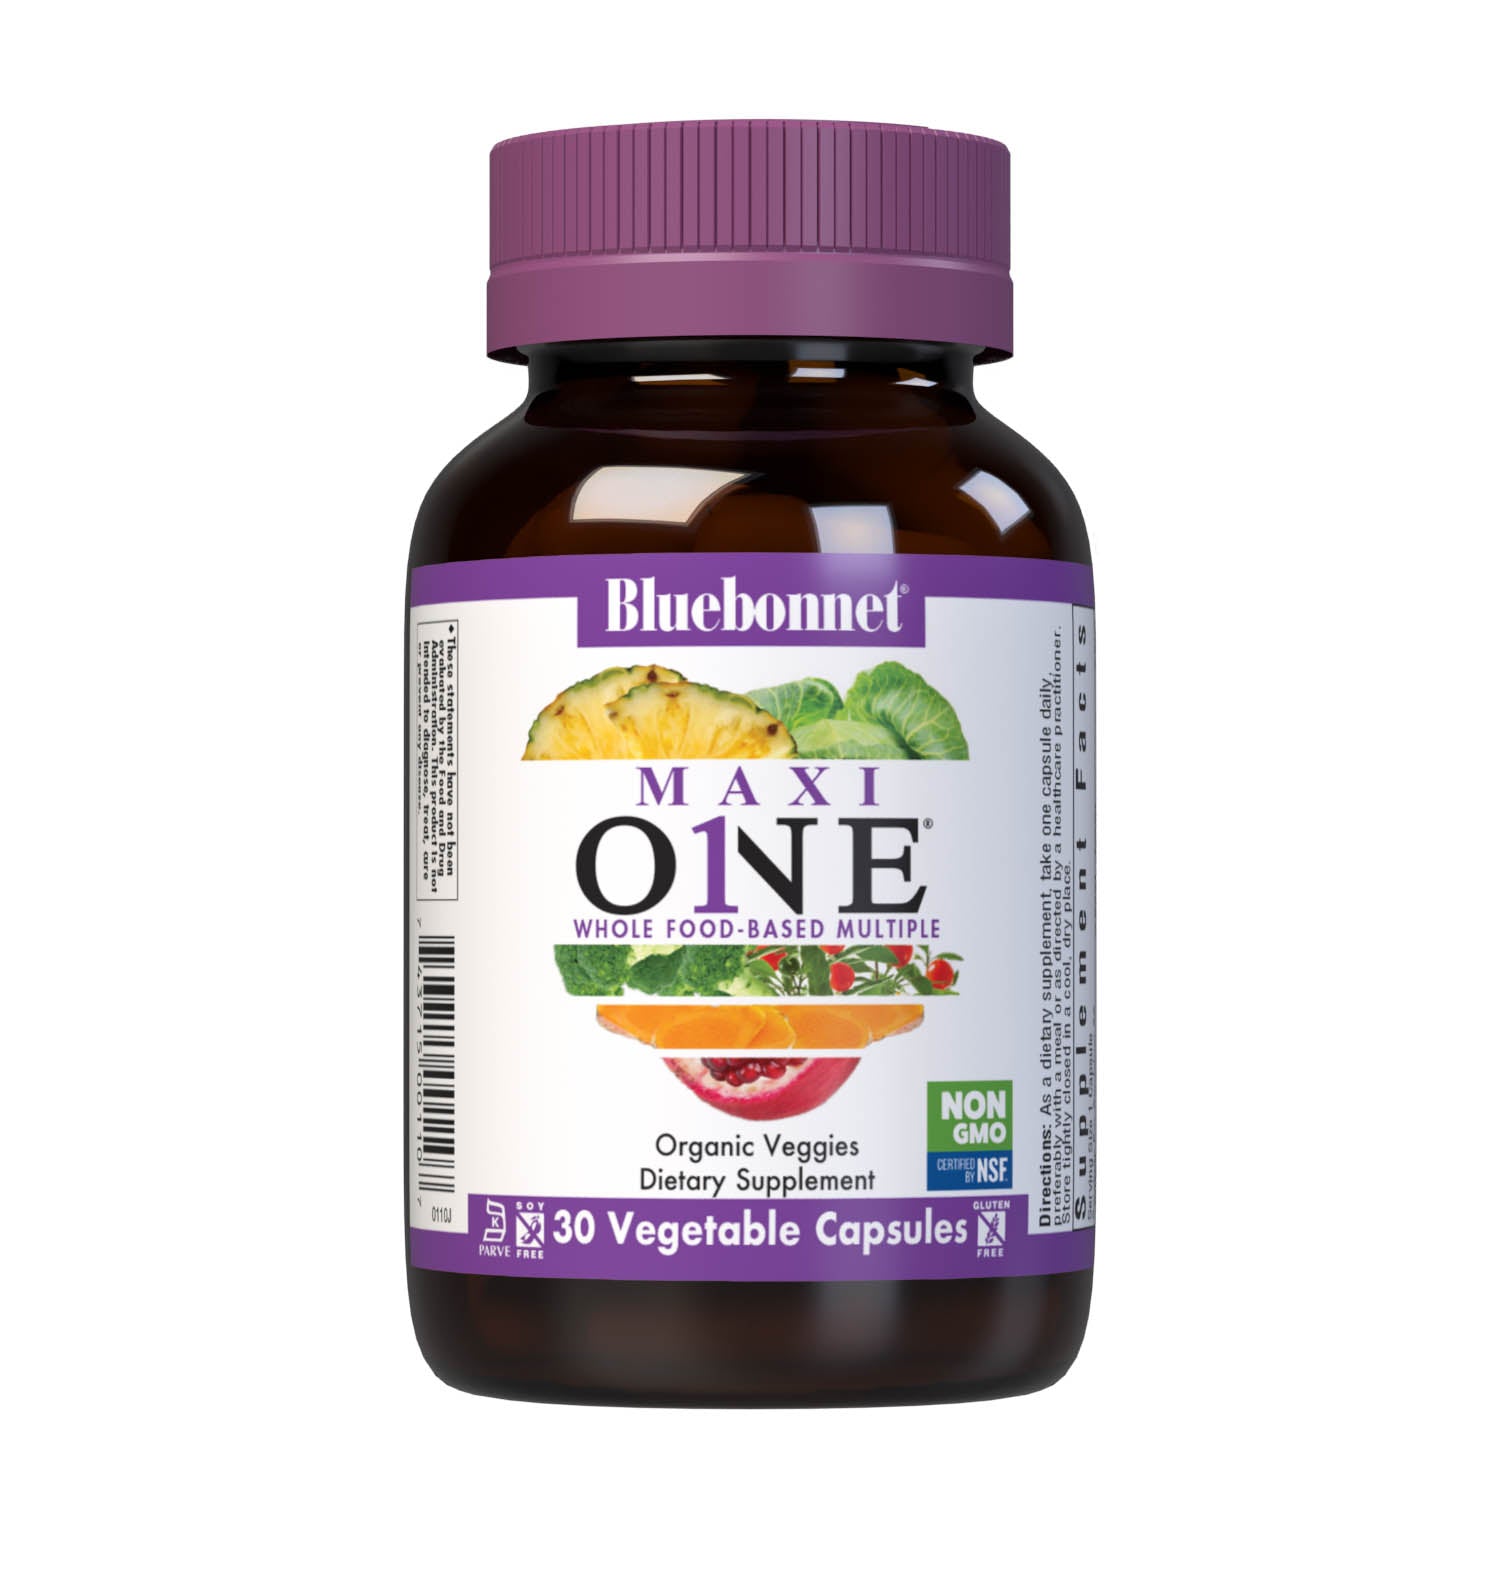 Bluebonnet’s Maxi ONE formula 30 Vegetable Capsules is a higher potency, single daily multivitamin and multimineral dietary supplement in a capsule and is formulated with highly efficient patented Albion chelated minerals, vitamin K2 from natto, select coenzyme B vitamins along with energy & vitality, organic whole food, and plant source enzyme blends. #size_30 count